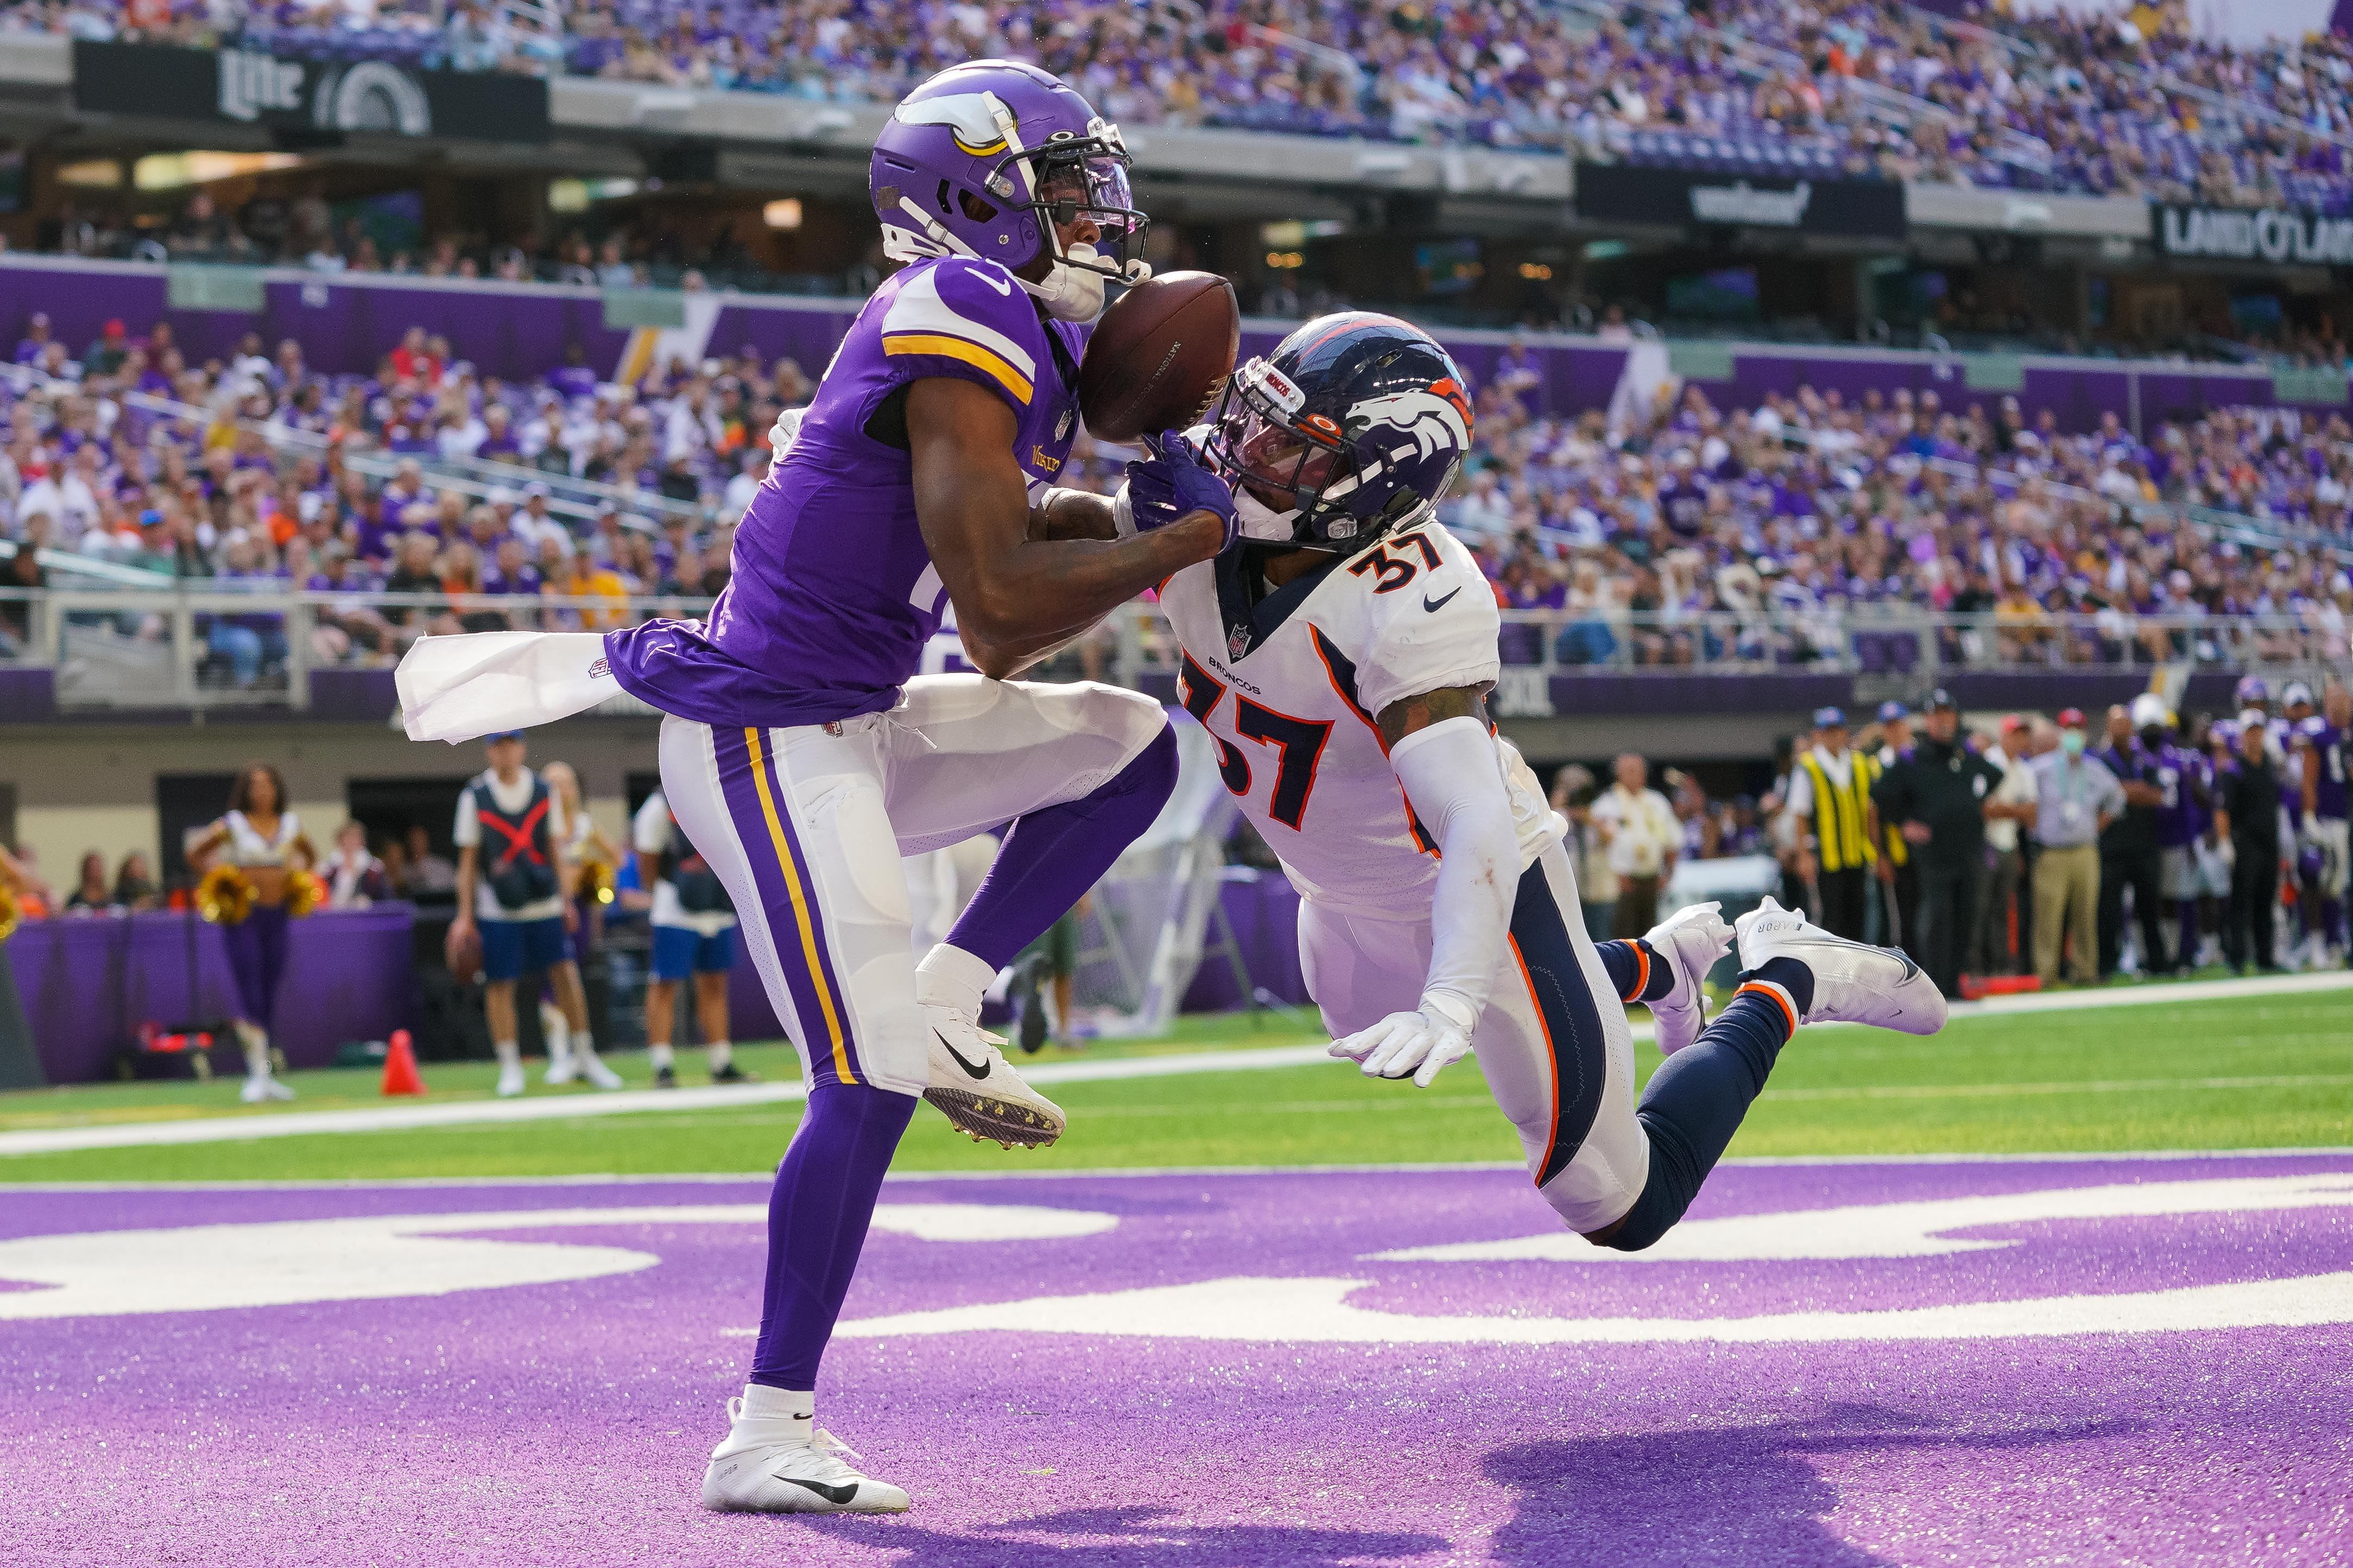 Minnesota Vikings wide receiver Whop Philyor (16) attempts to catch a pass against the Denver Broncos defensive back P.J. Locke (37) in the third quarter at U.S. Bank Stadium.